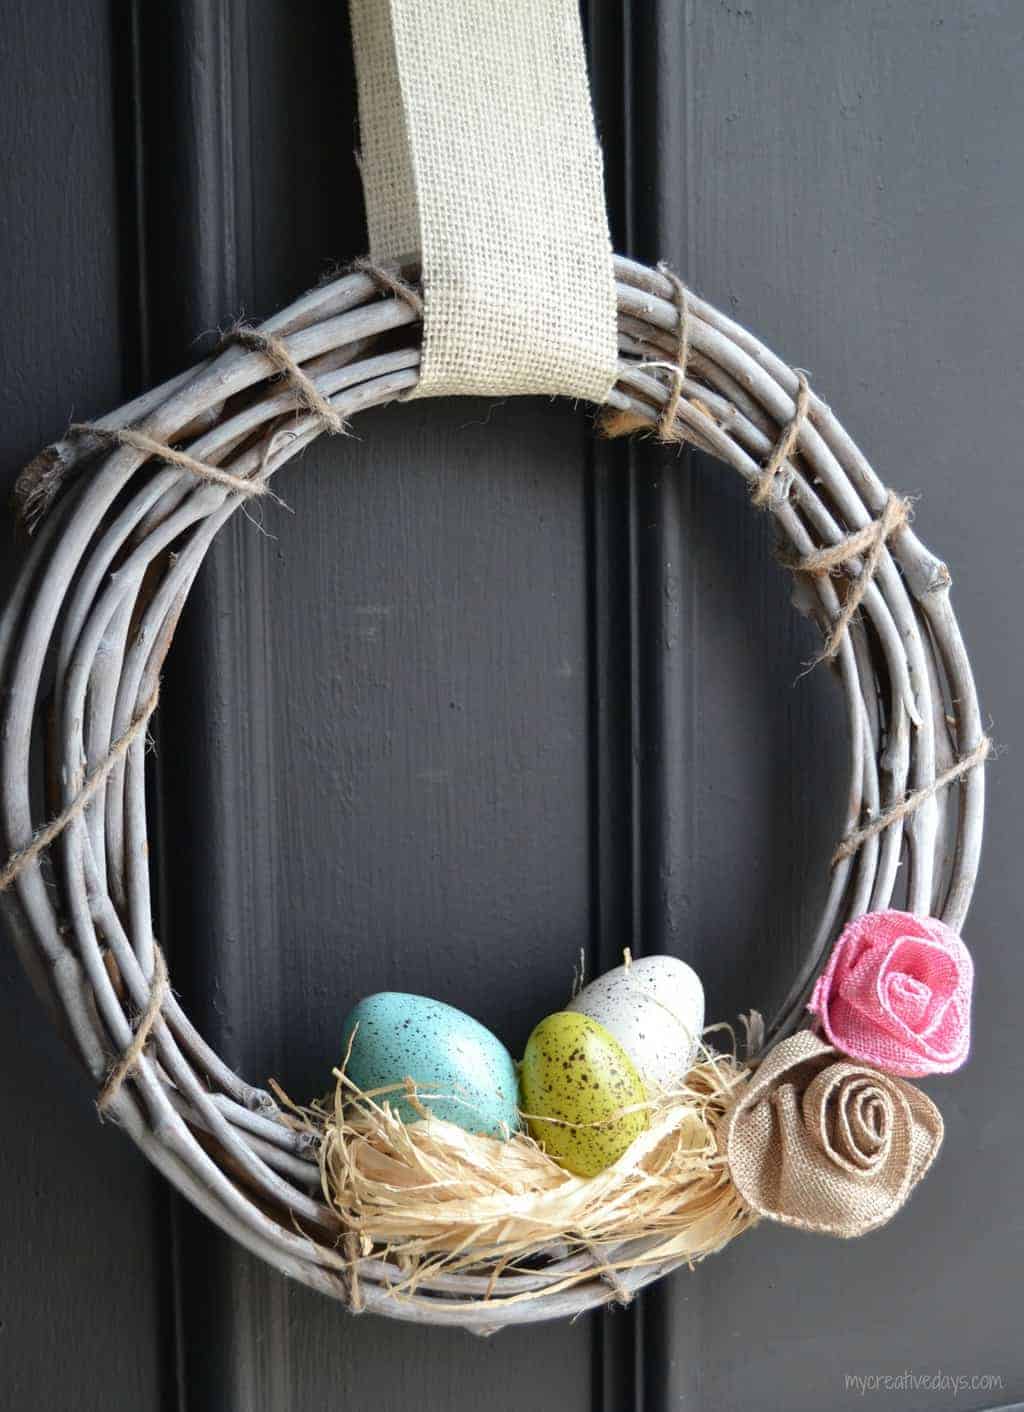 Discover charming Farmhouse Easter Decor DIY Ideas & Tutorials. Transform your home with rustic elegance. Get inspired & create a cozy Easter ambiance!